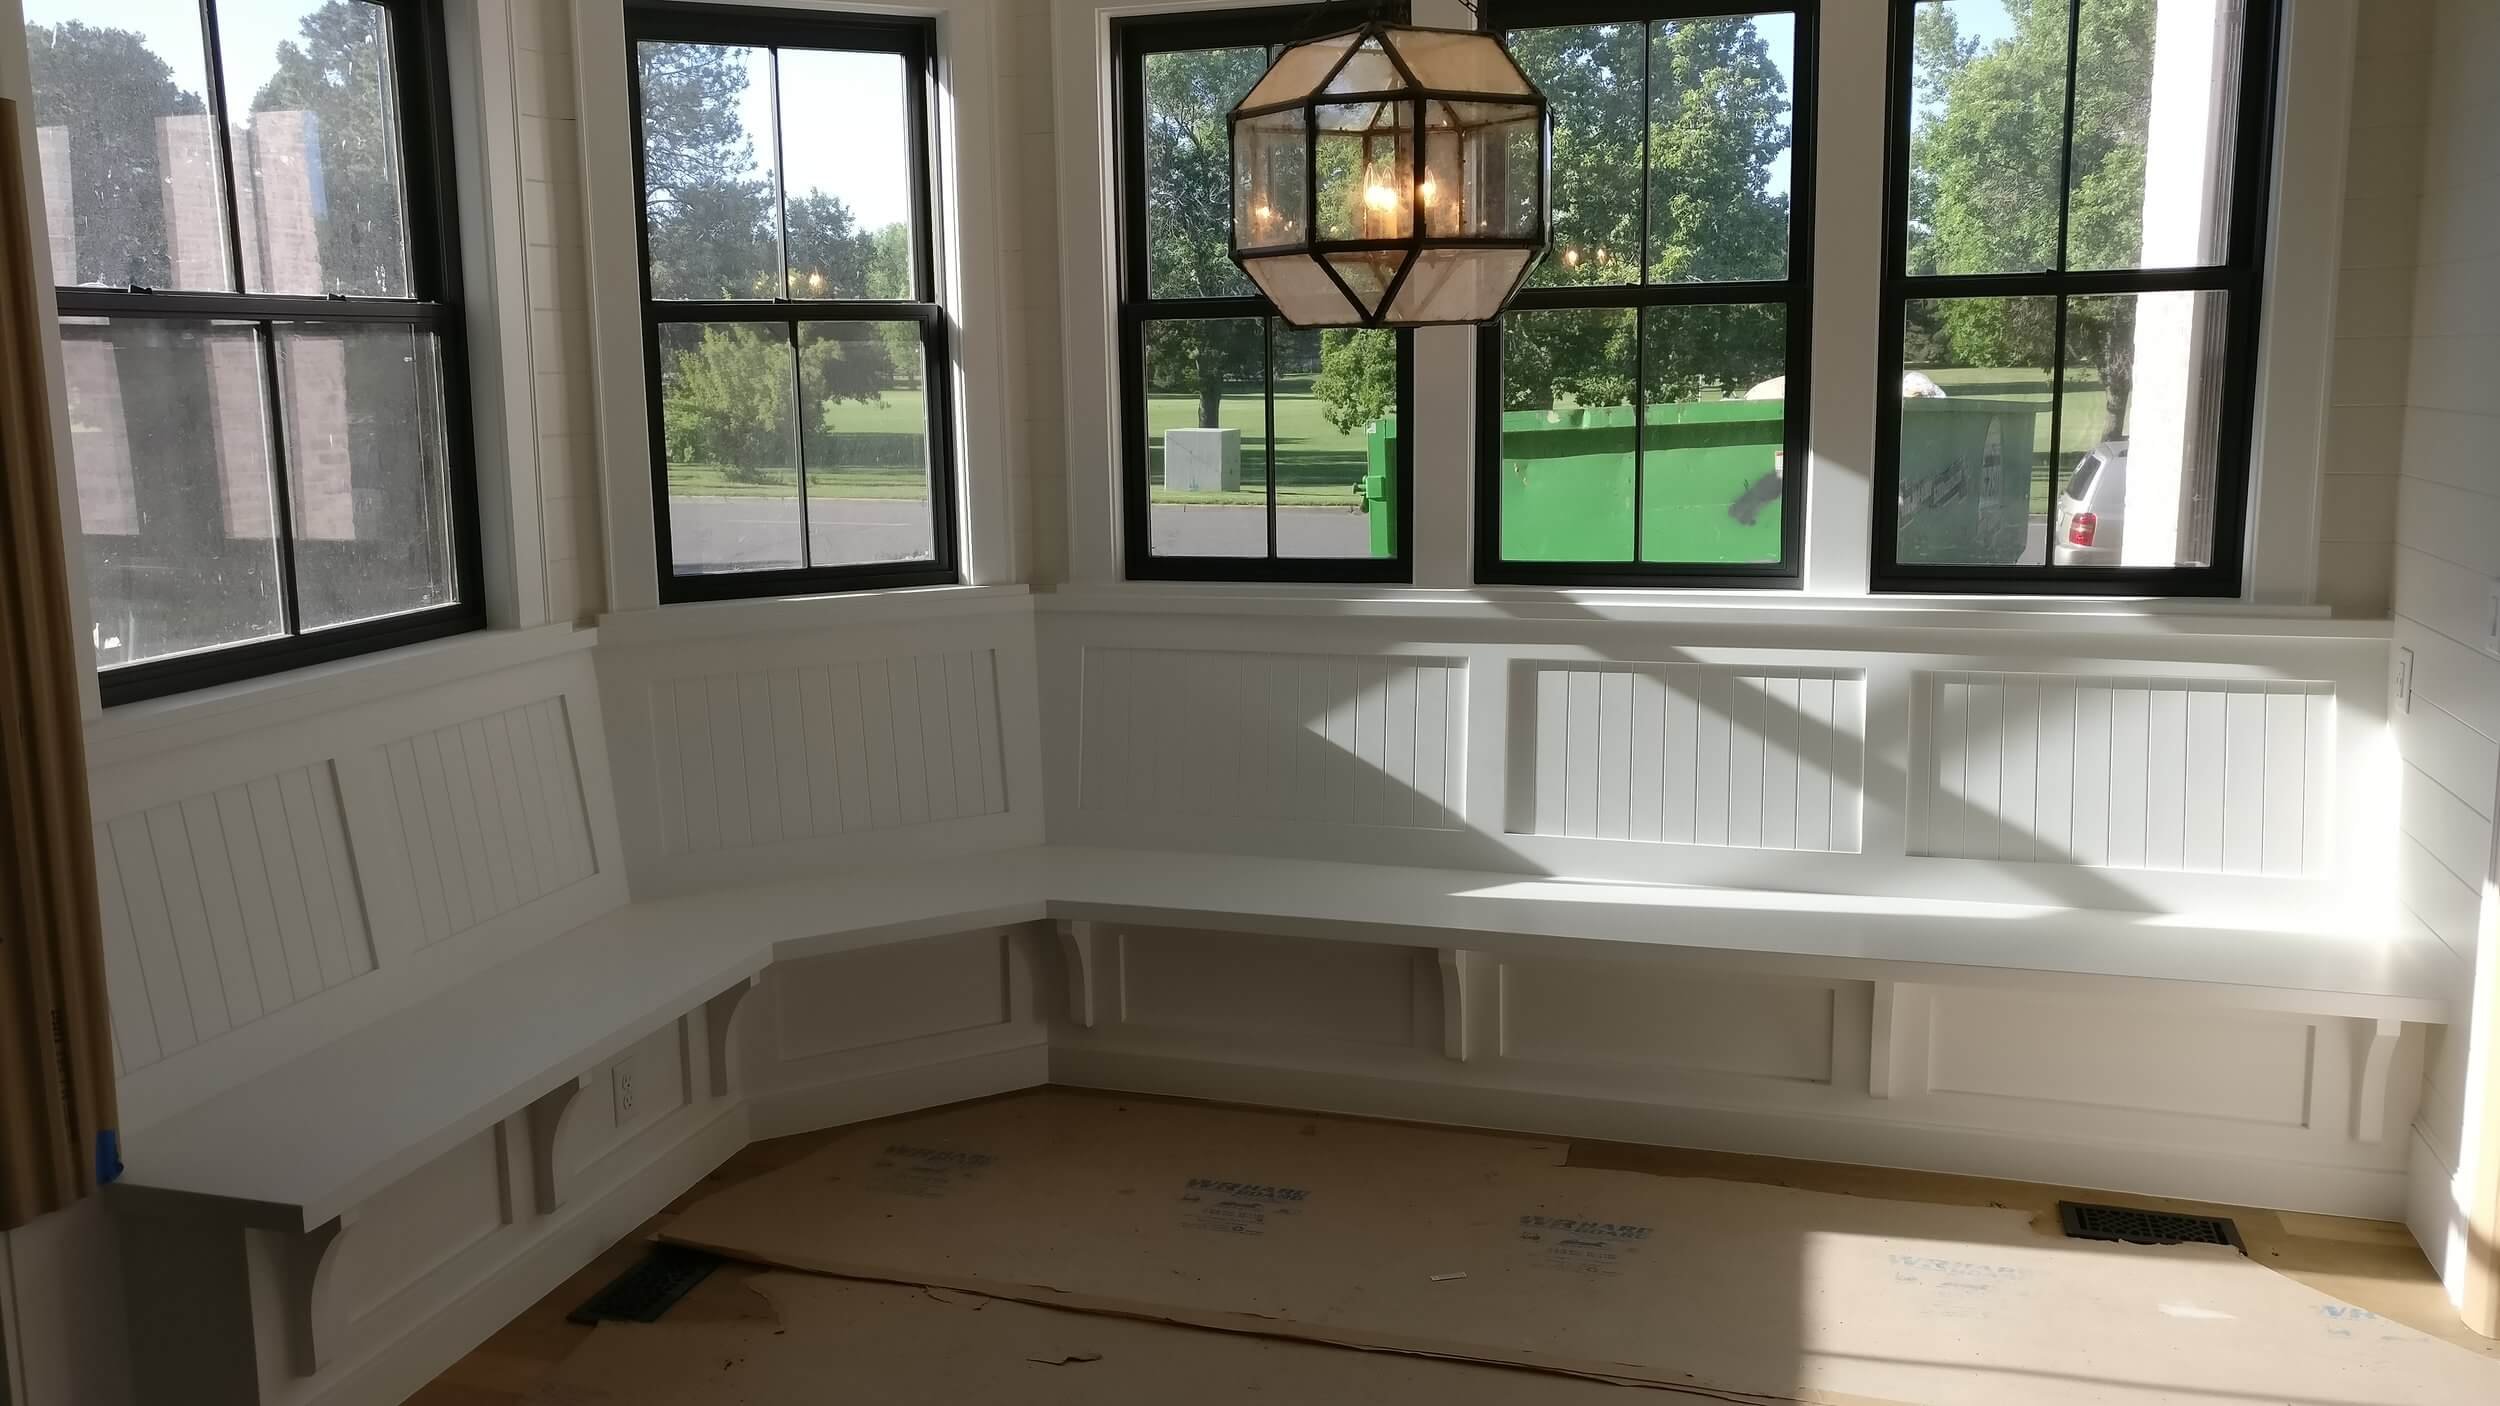 Millwork fabrication and installation by TG Woodworking